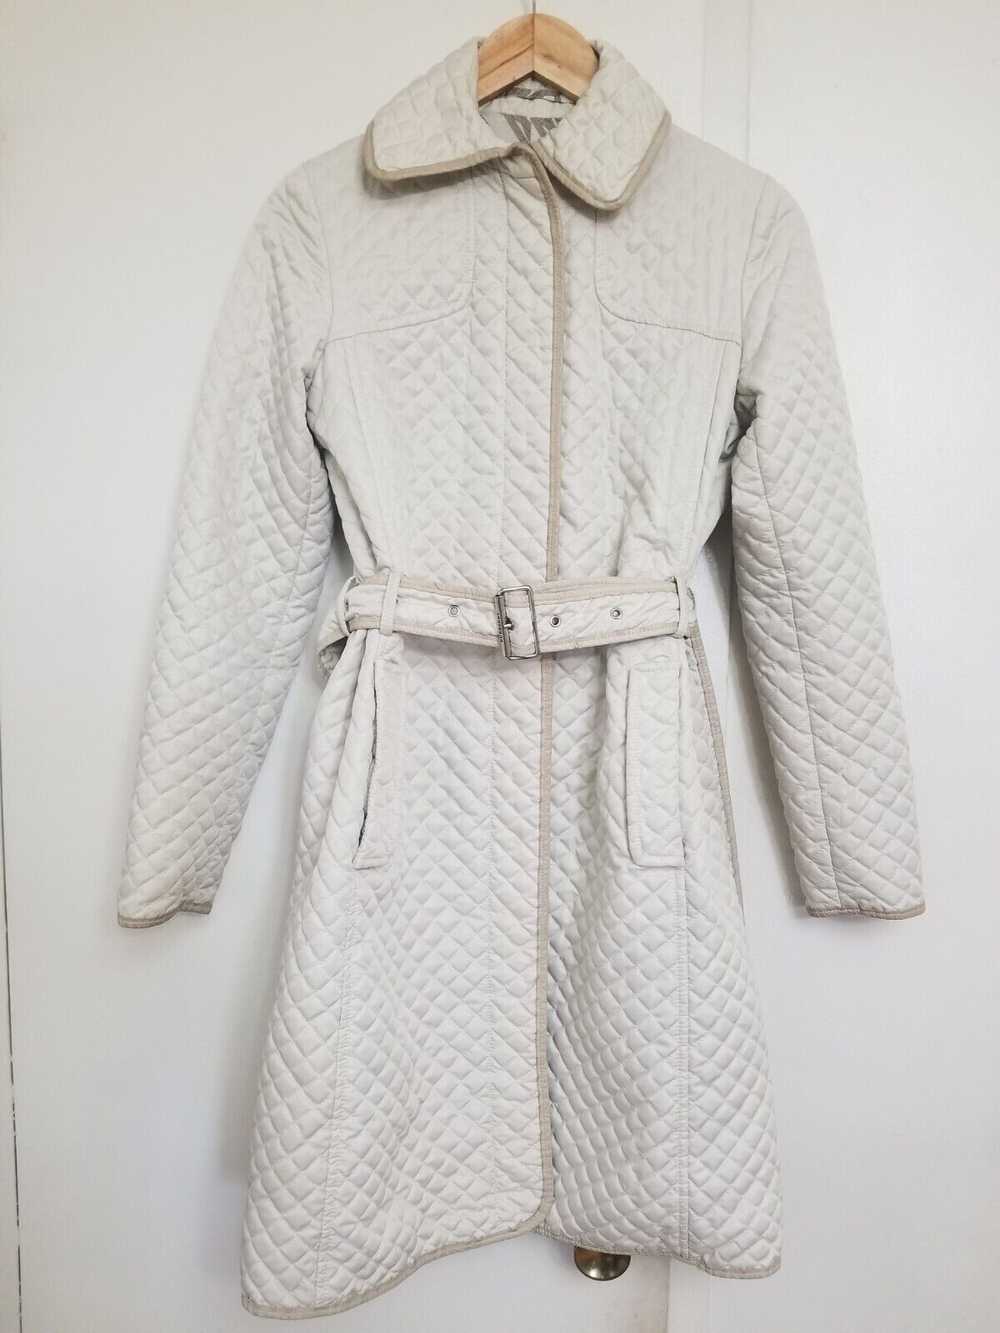 Burberry BURBERRY LONDON QUILTED IVORY JACKET - image 6